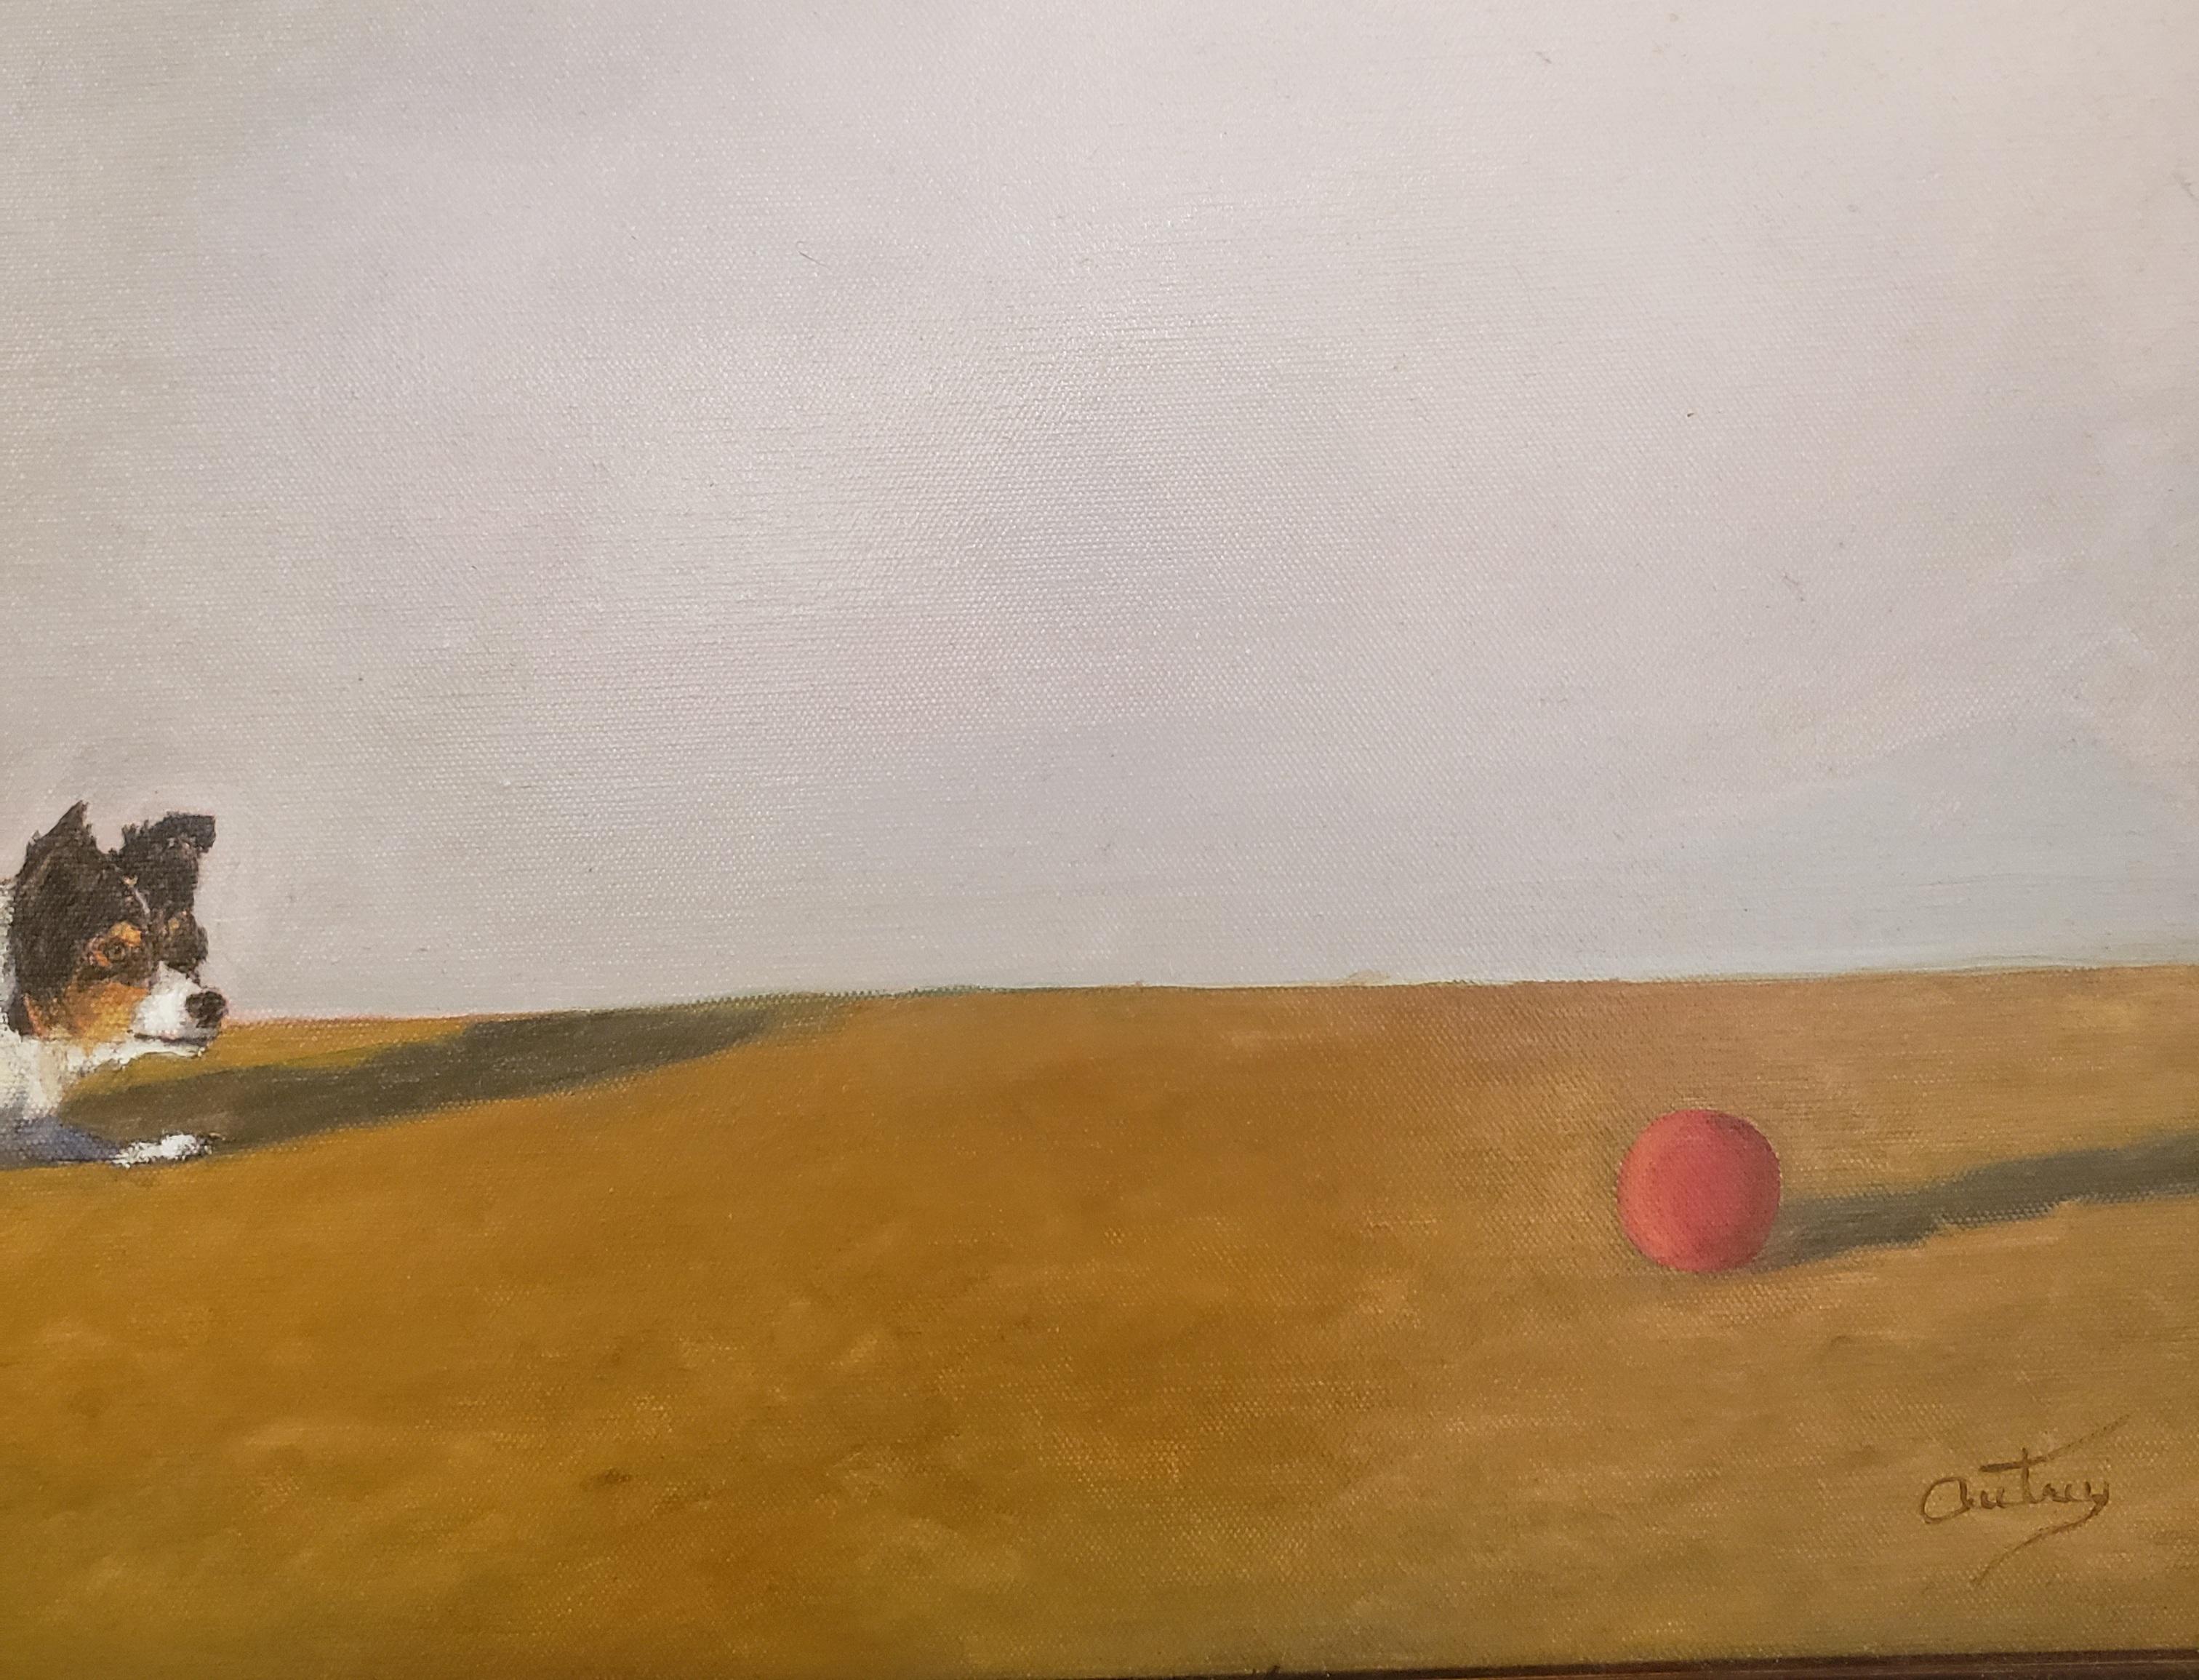 The Red Ball is by Texas artist Luke Autrey who lives and paints in Austin, Texas. In this painting are two simple subject matters a dog  and a red ball. The Red Ball is painted in oil.  It makes us wonder if the dog will ever catch up with the Red